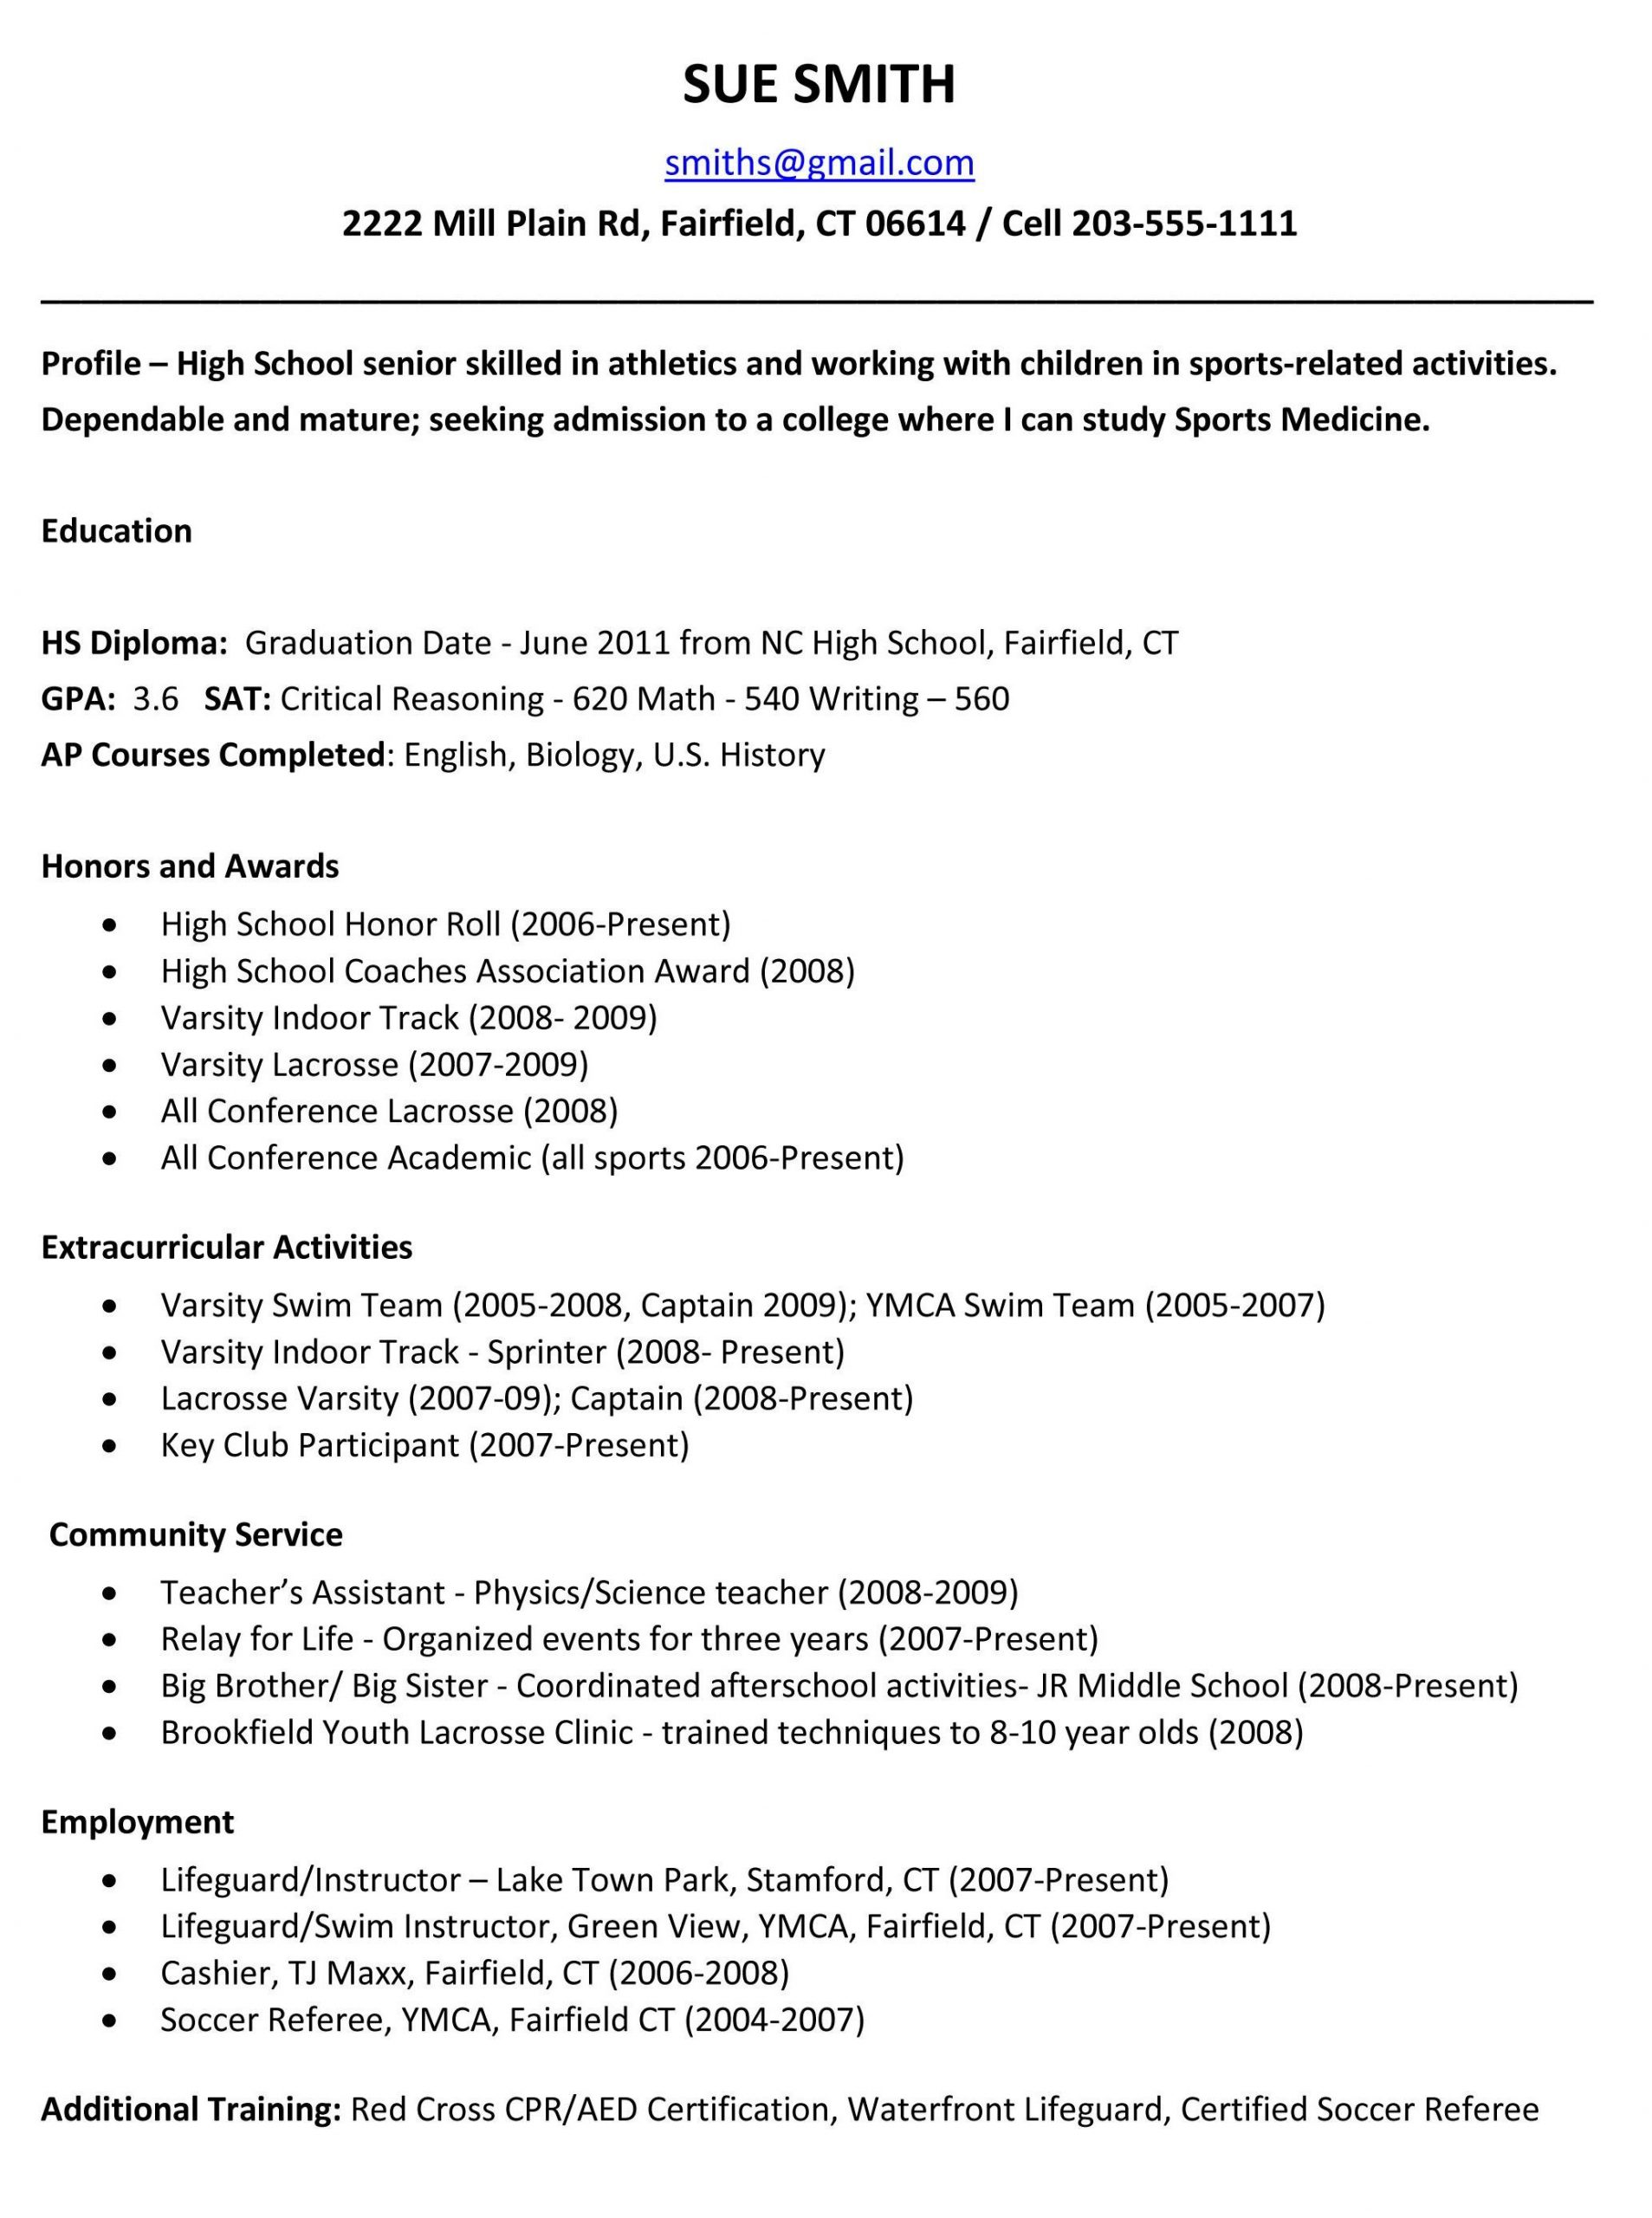 Resume Samples for High School Students Applying to College Sample High School Resume for College App – High School Resume …